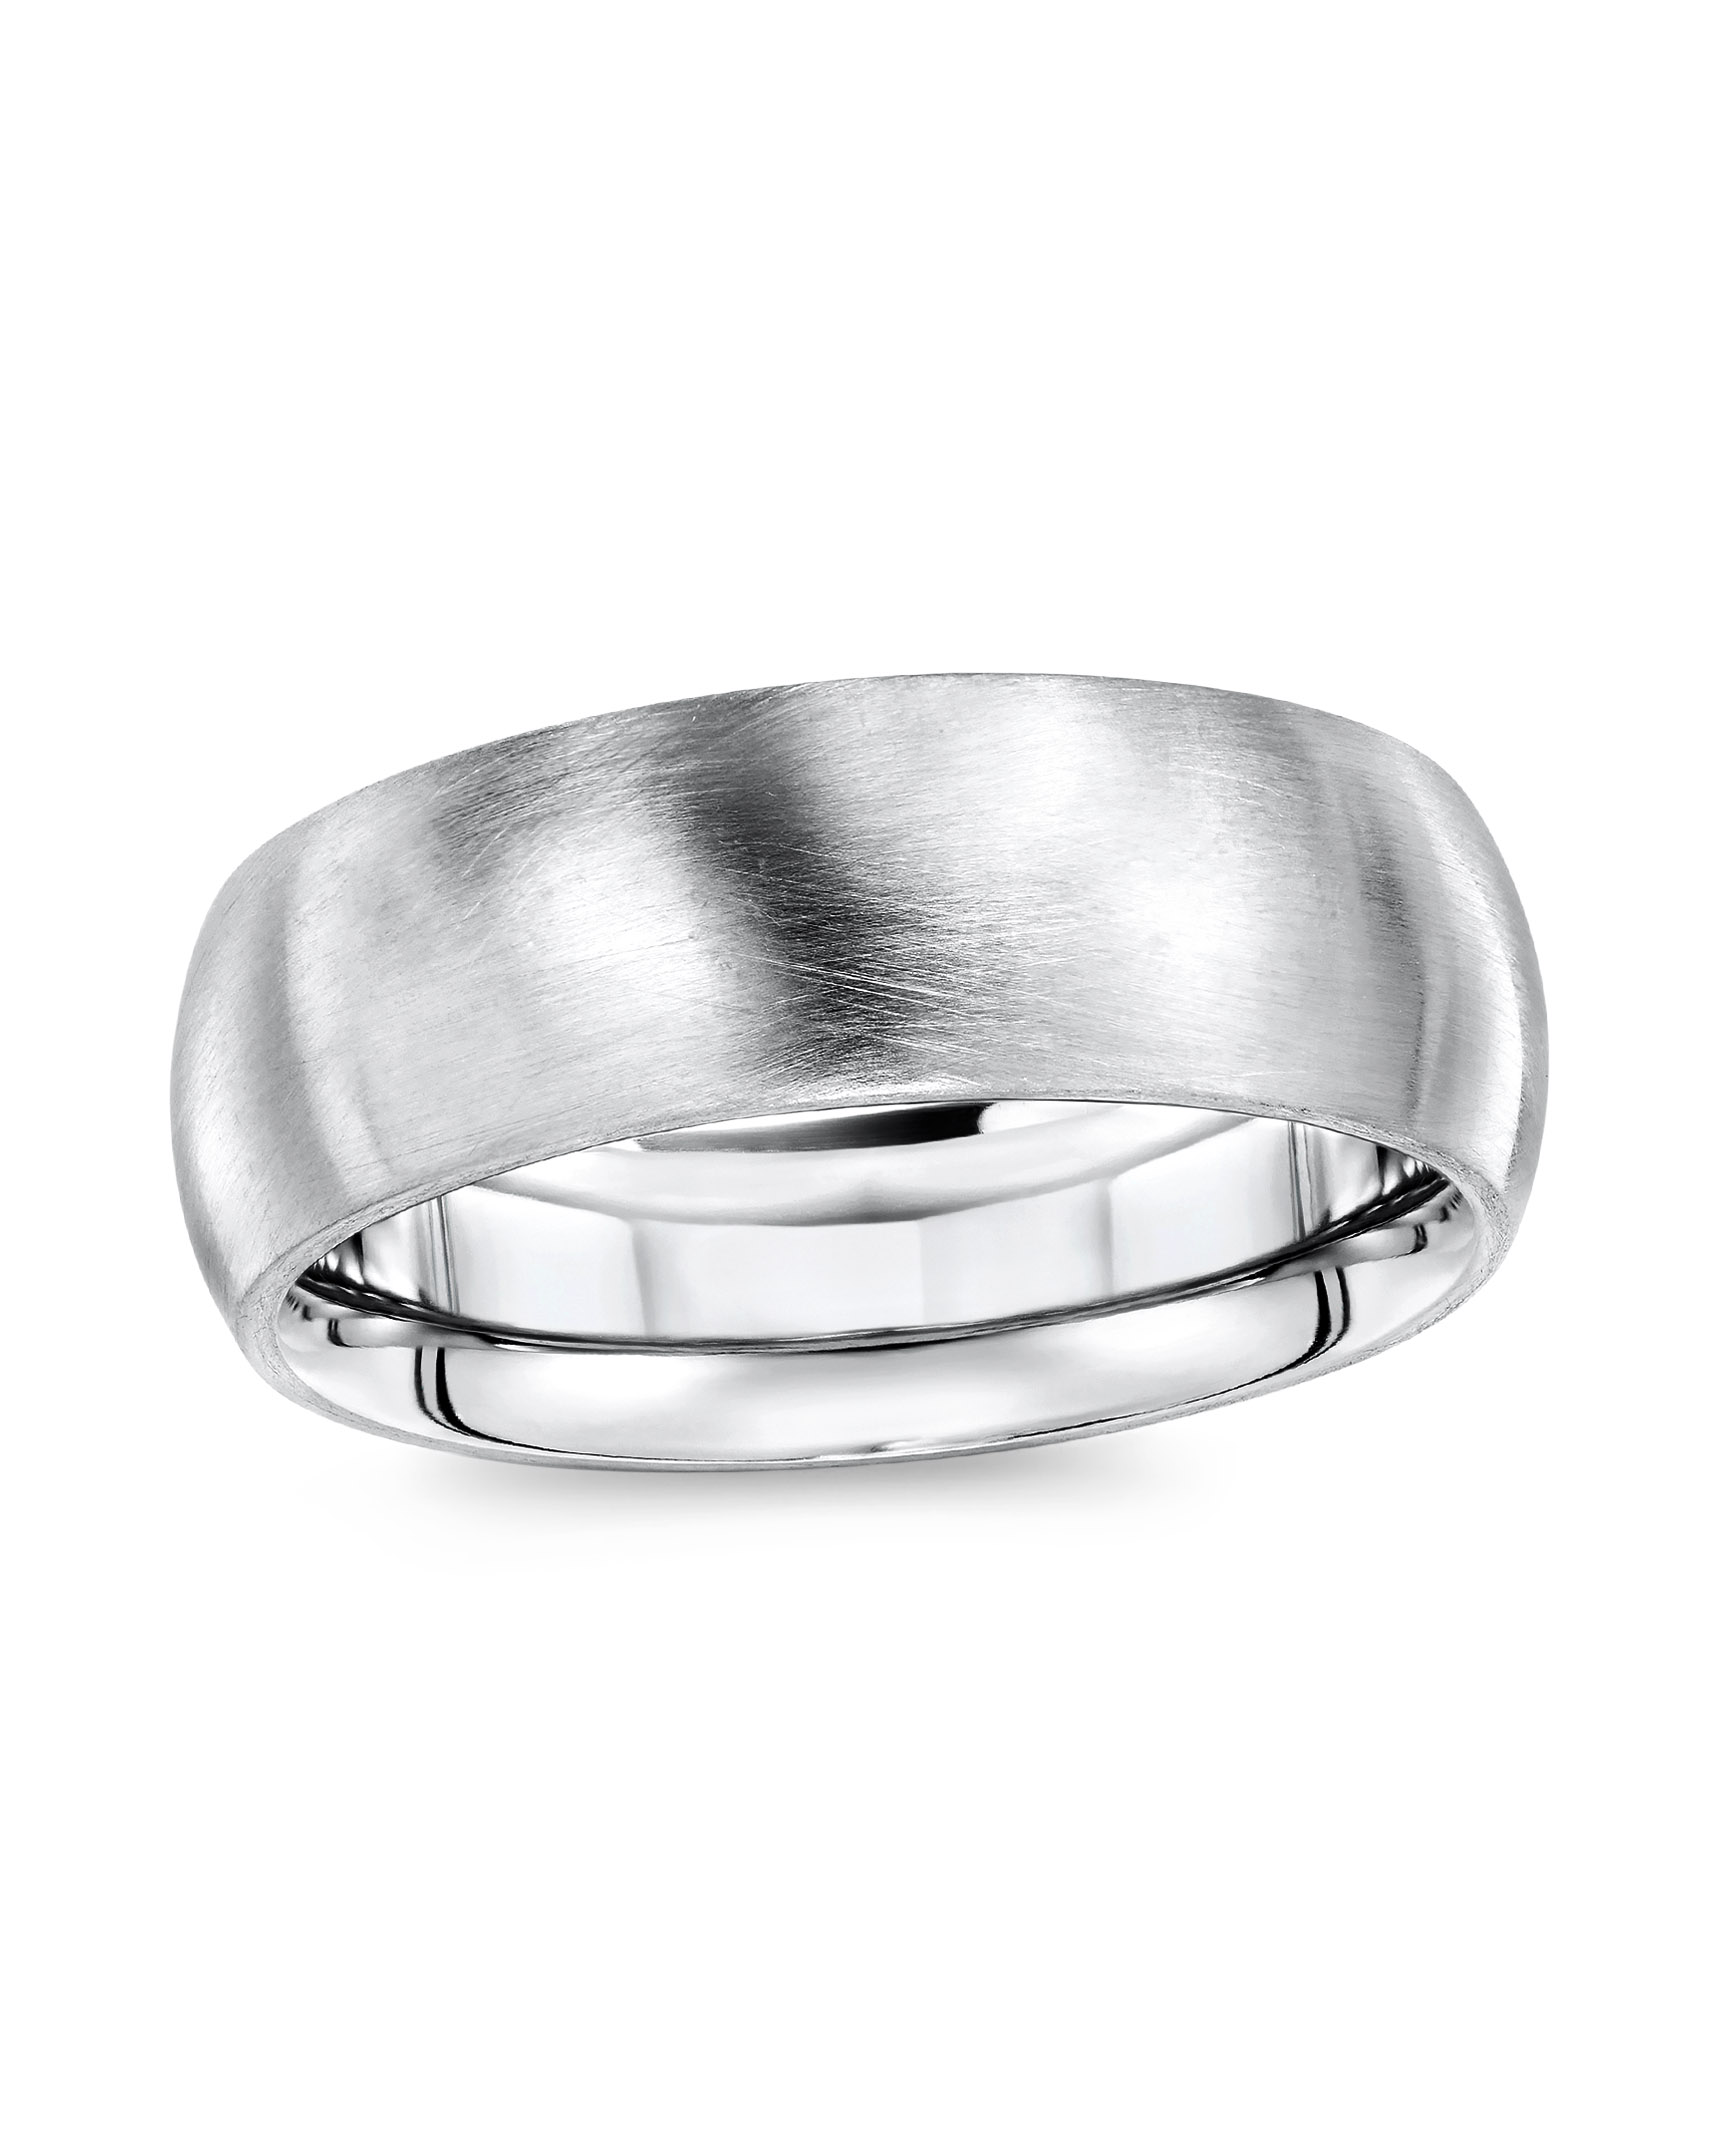 9mm Comfort Fit Sterling Silver Wedding Band Ring